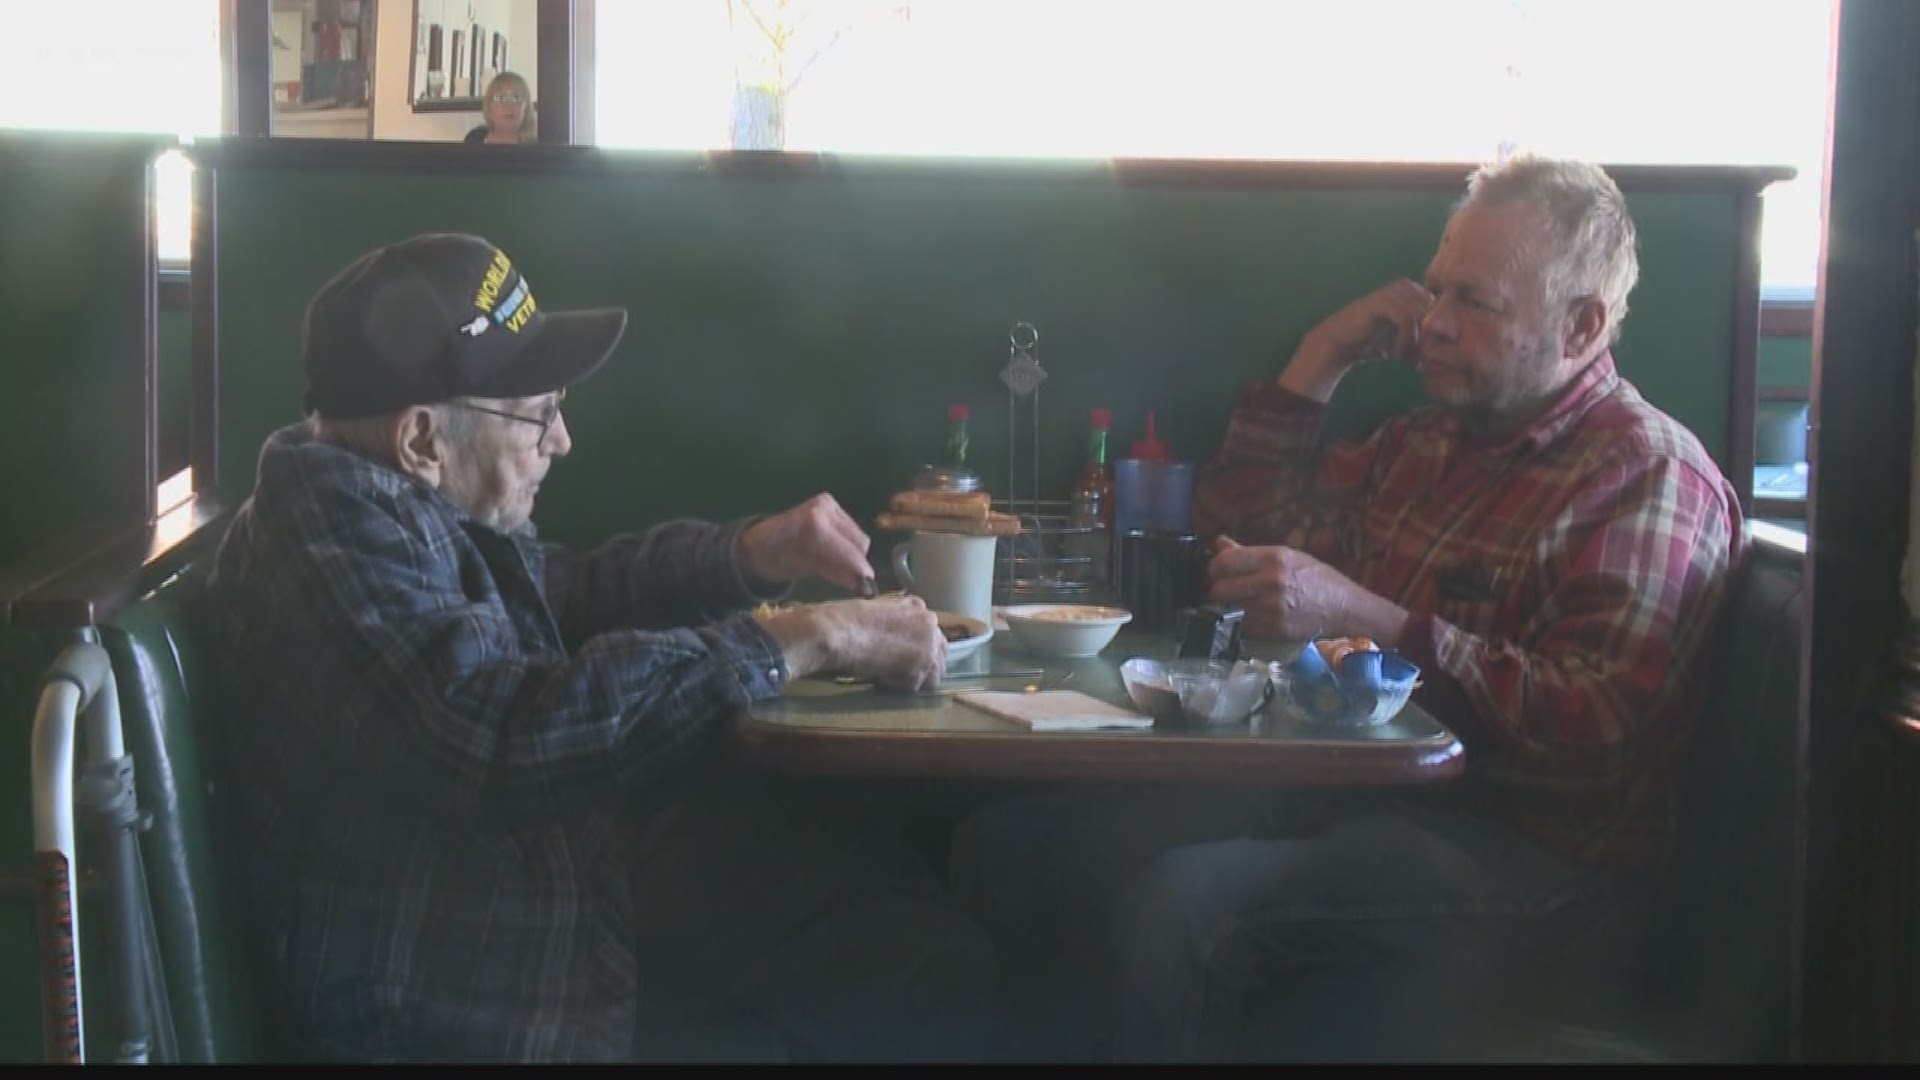 According to staff at Dueling Irons, paying for Rankin's breakfast has become somewhat of a tradition among regulars.